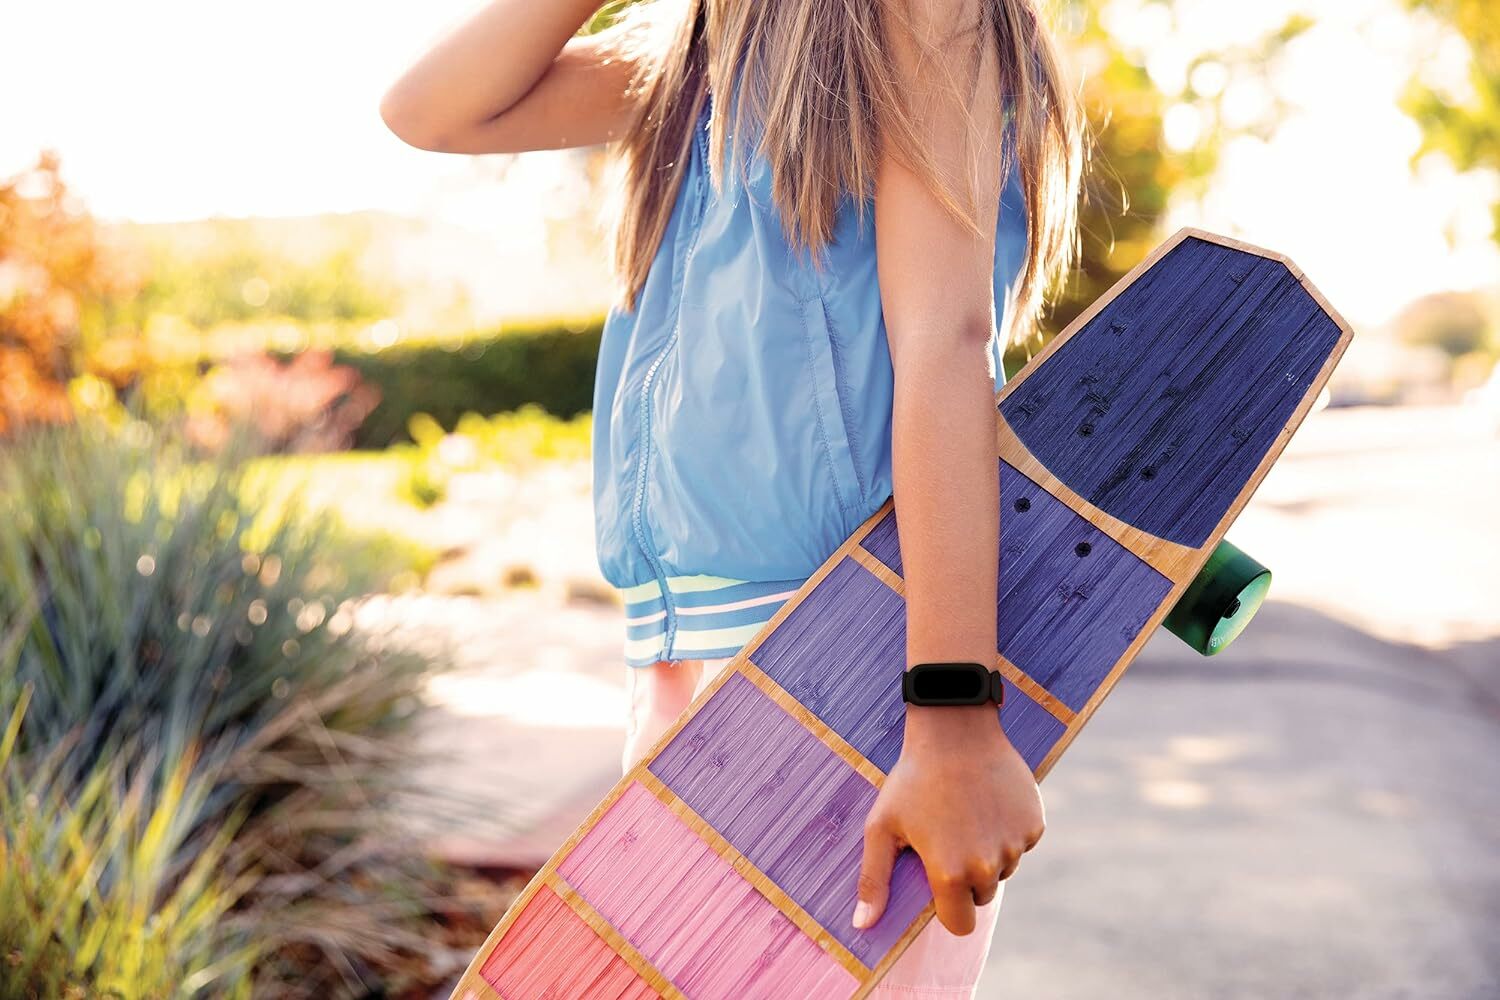 A young girl hold a longboard and wears a Fitbit